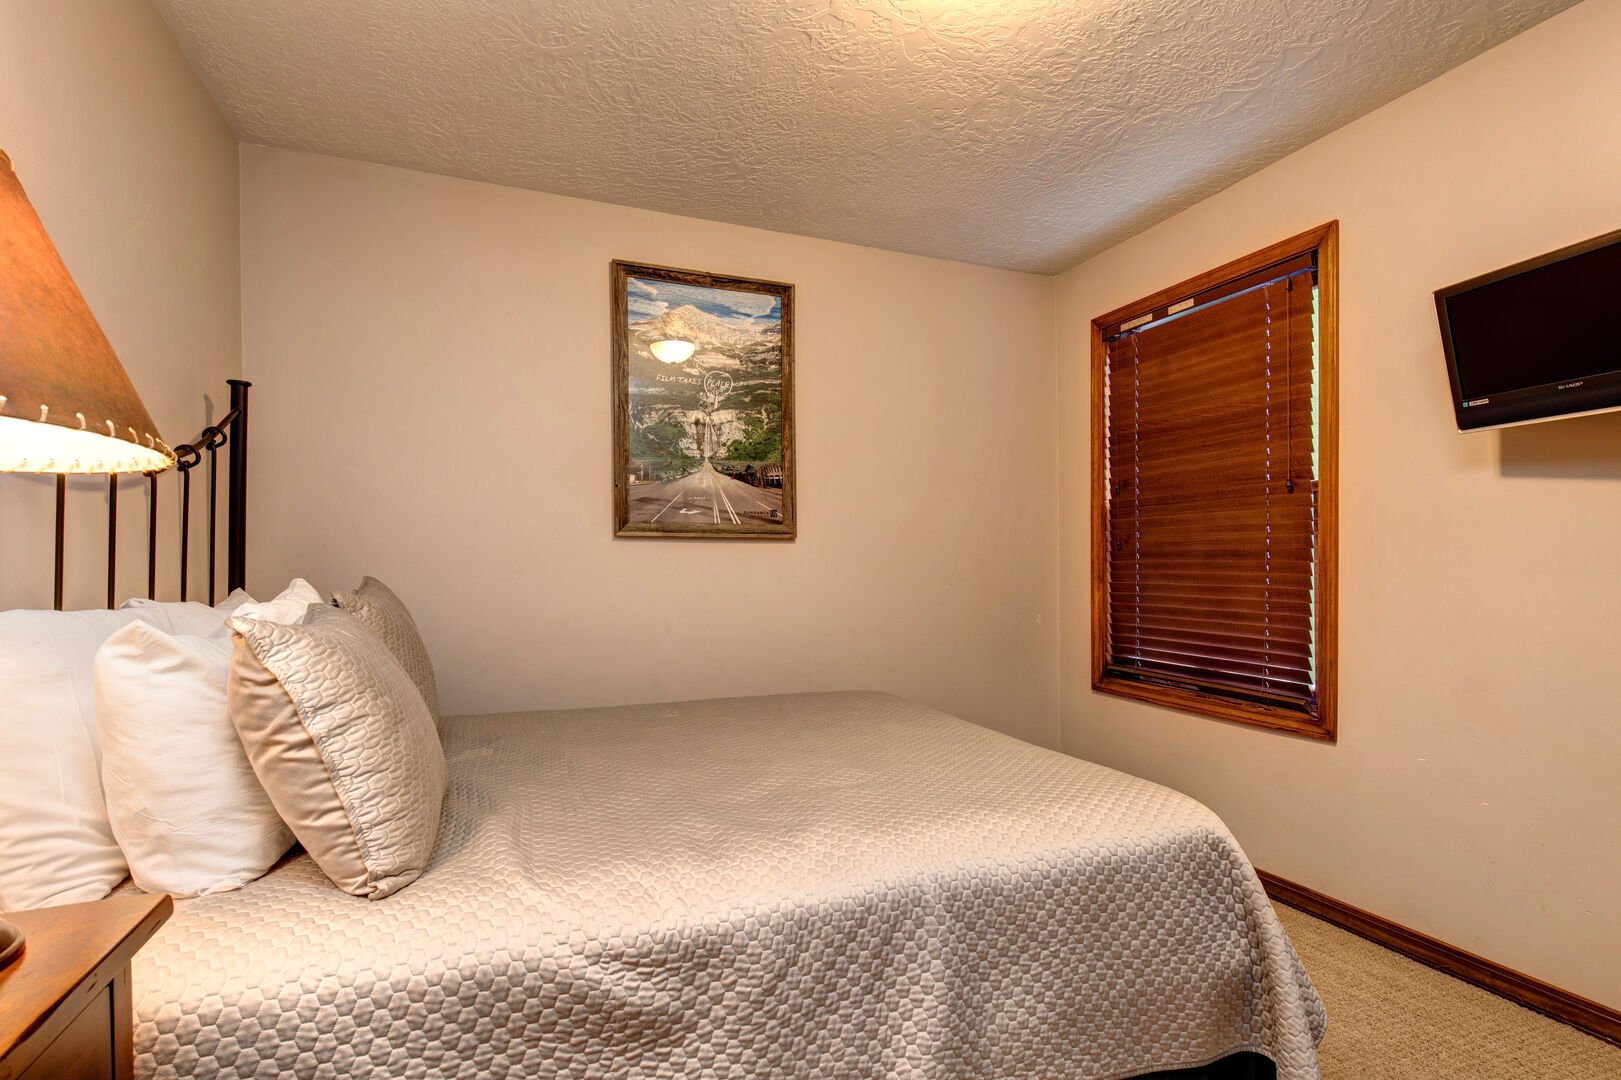 Bedroom 3 | Main Level, Queen Bed, TV, Full Bath with Shower Shared with Main Living Area